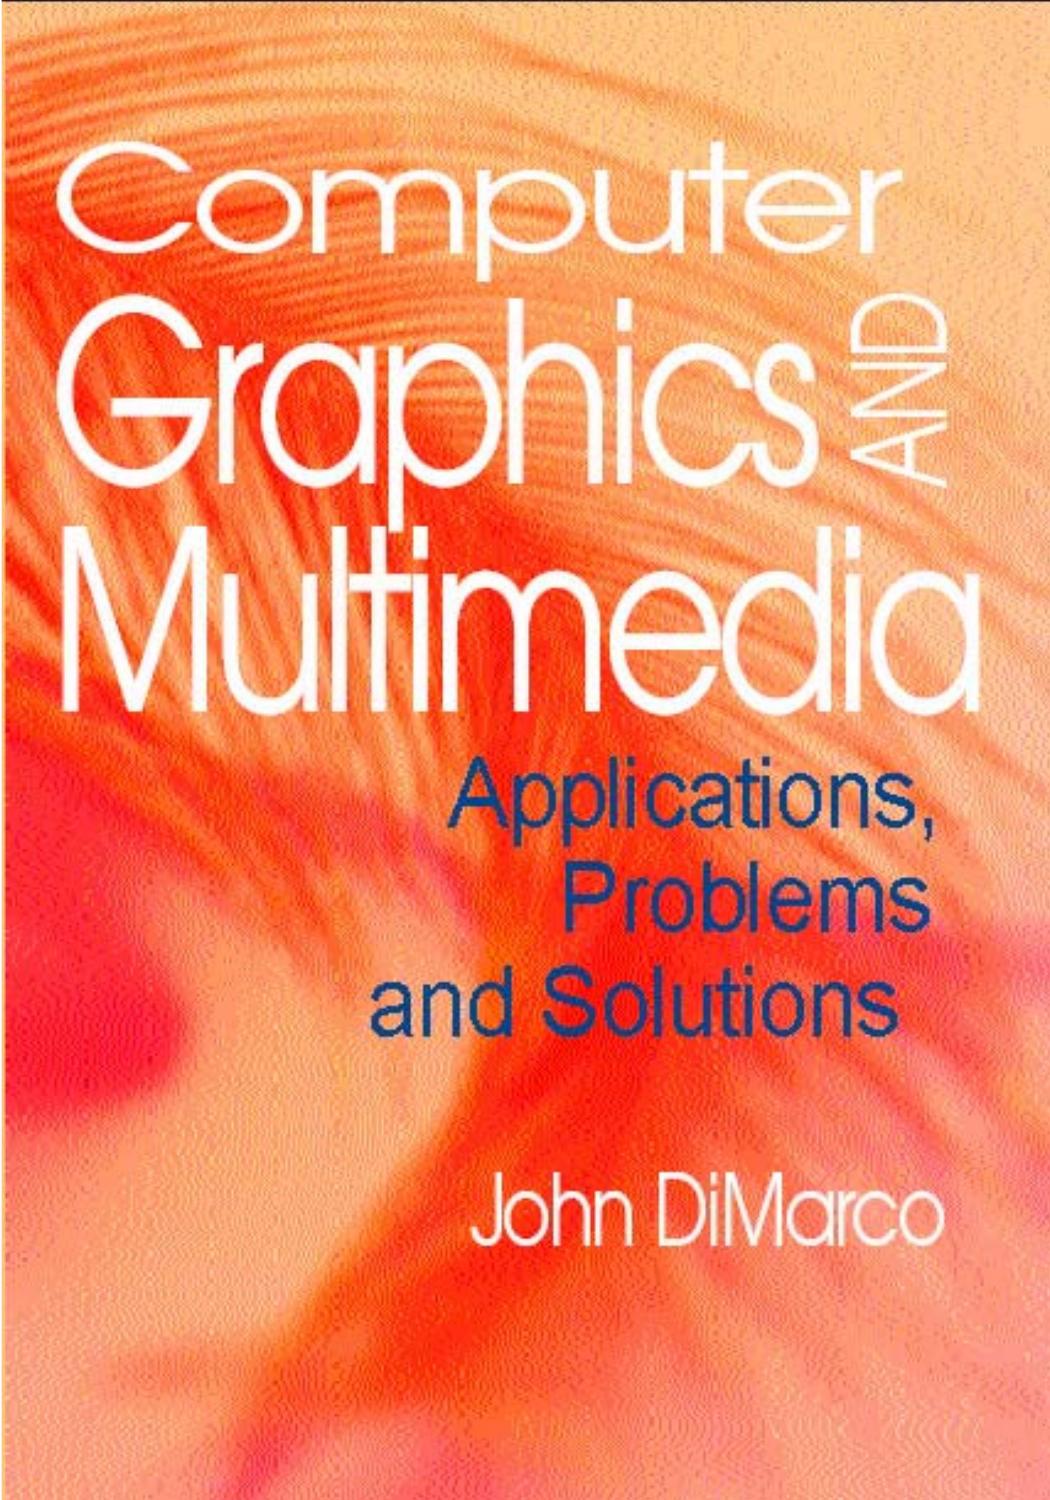 Computer Graphics and Multimedia : Applications, Problems and Solutions